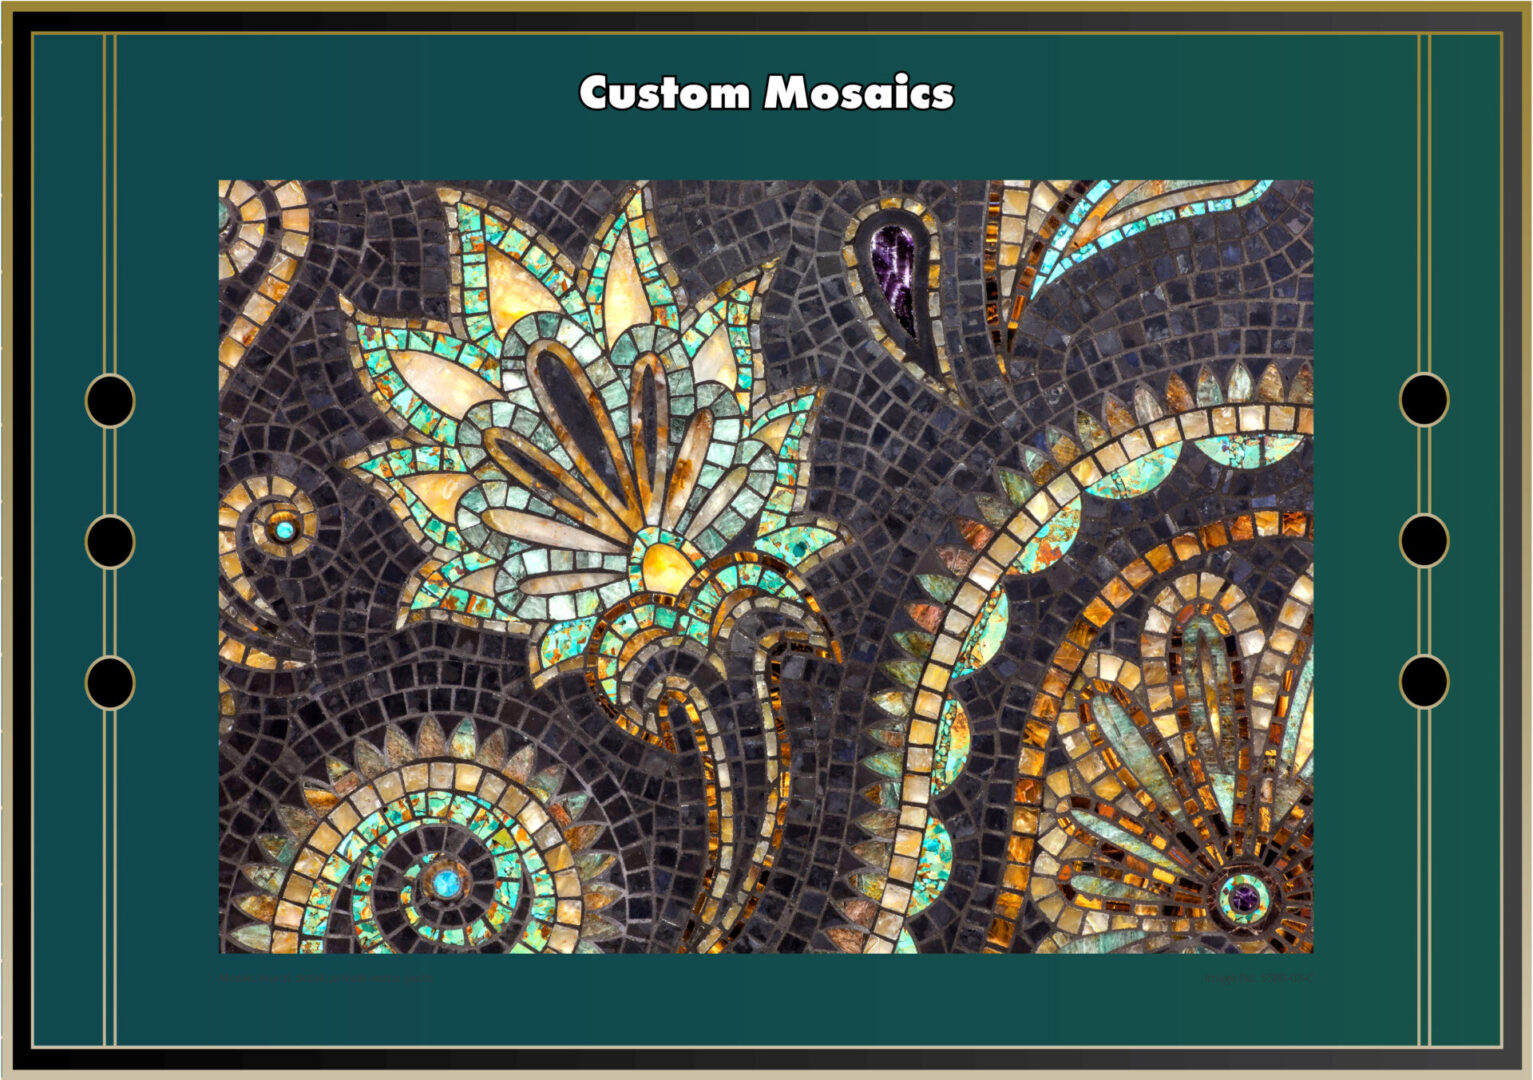 Custom Mosaics are available for all clients